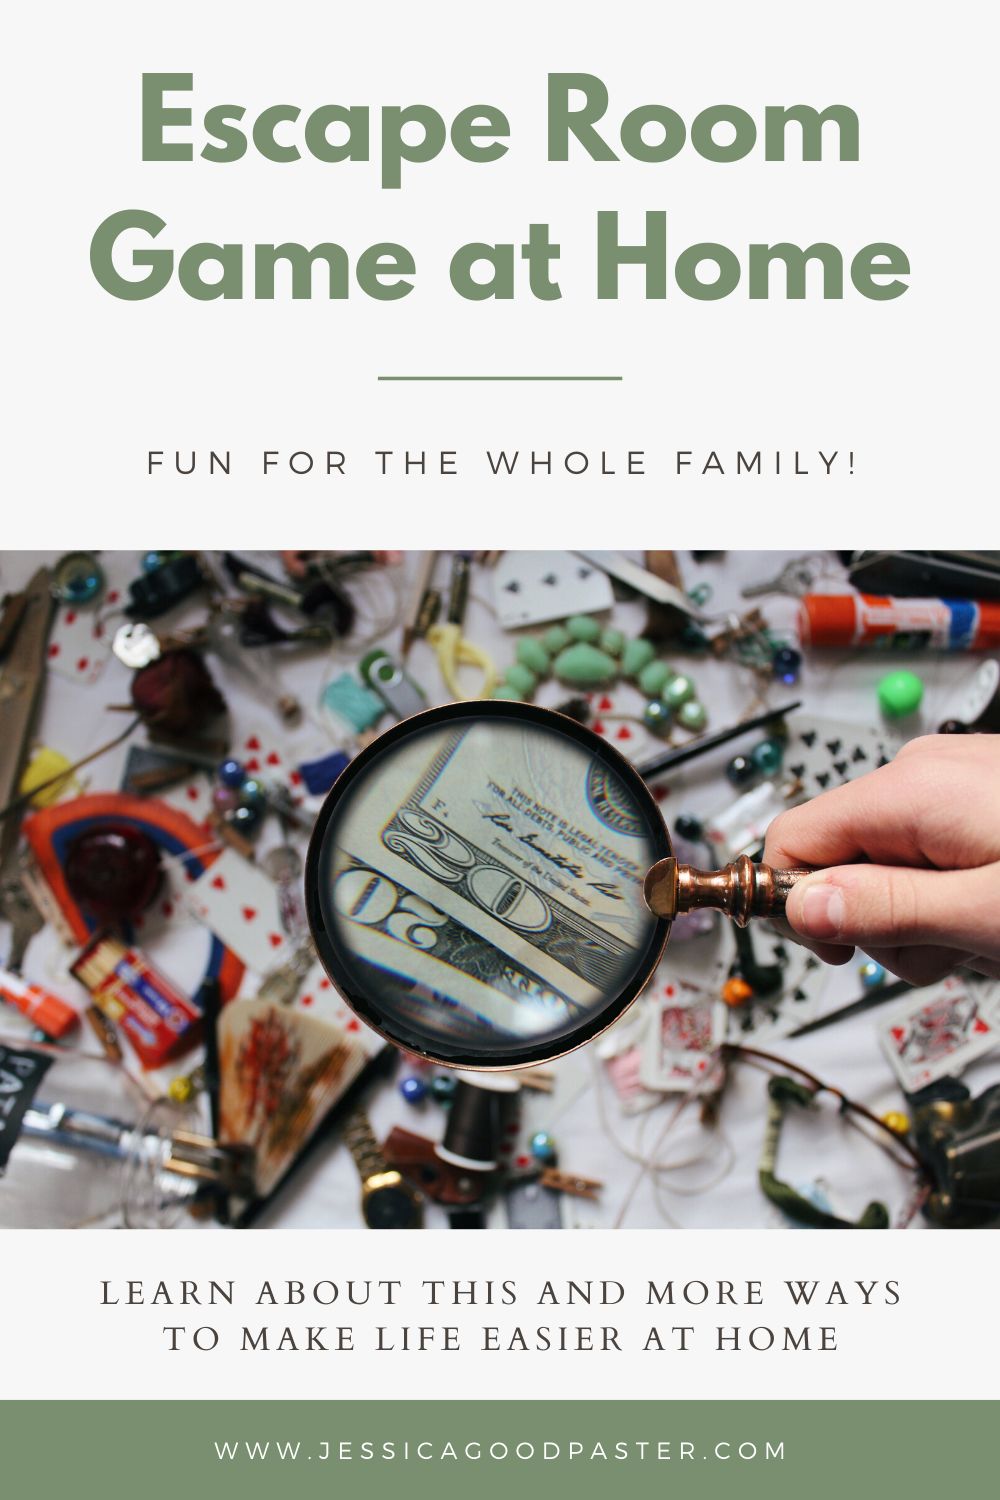 Play an escape room game at home! Tips, tricks, resources, and free educational activities for when you're stuck at home! This list includes ways to make life easier for the whole family. Find fun and games, supports for kids with special needs, tips for getting food and supplies delivered, physical and mental health activities, and free educational resources! #home #socialdistancing #parenting 